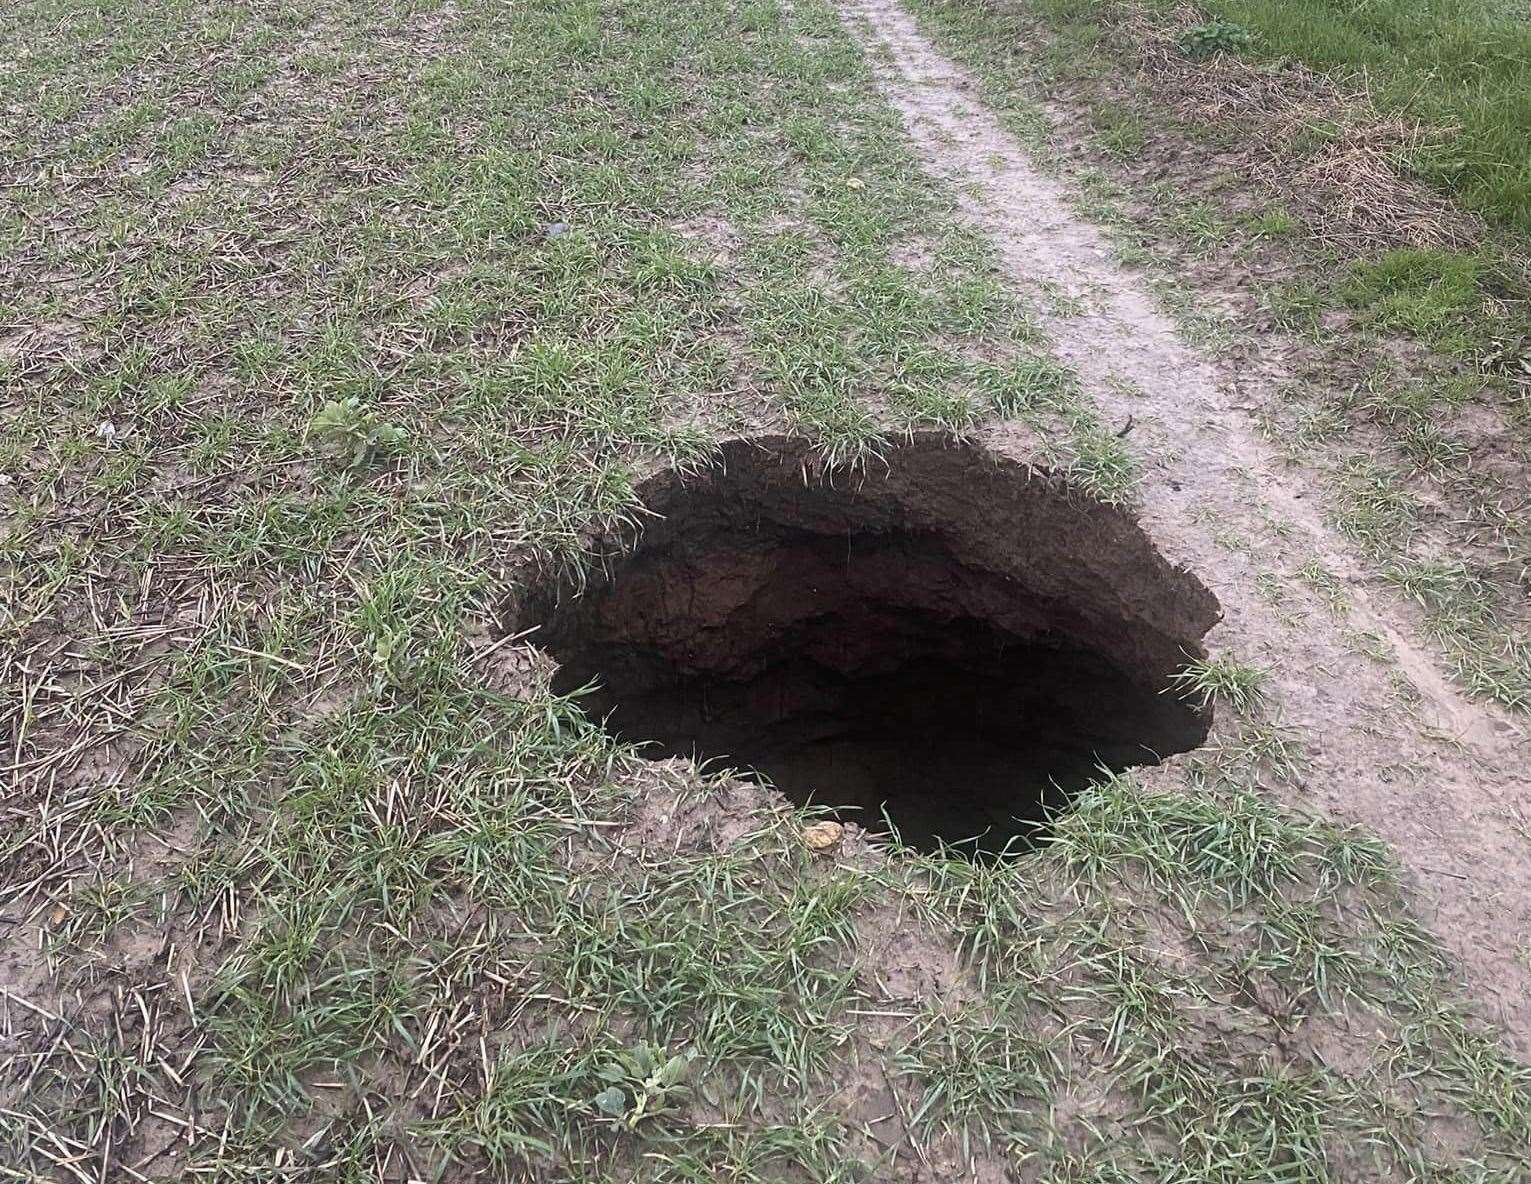 Michael Winsor spotted a "substantial sinkhole" while walking in a field near Northbourne Road. Picture: Michael Winsor